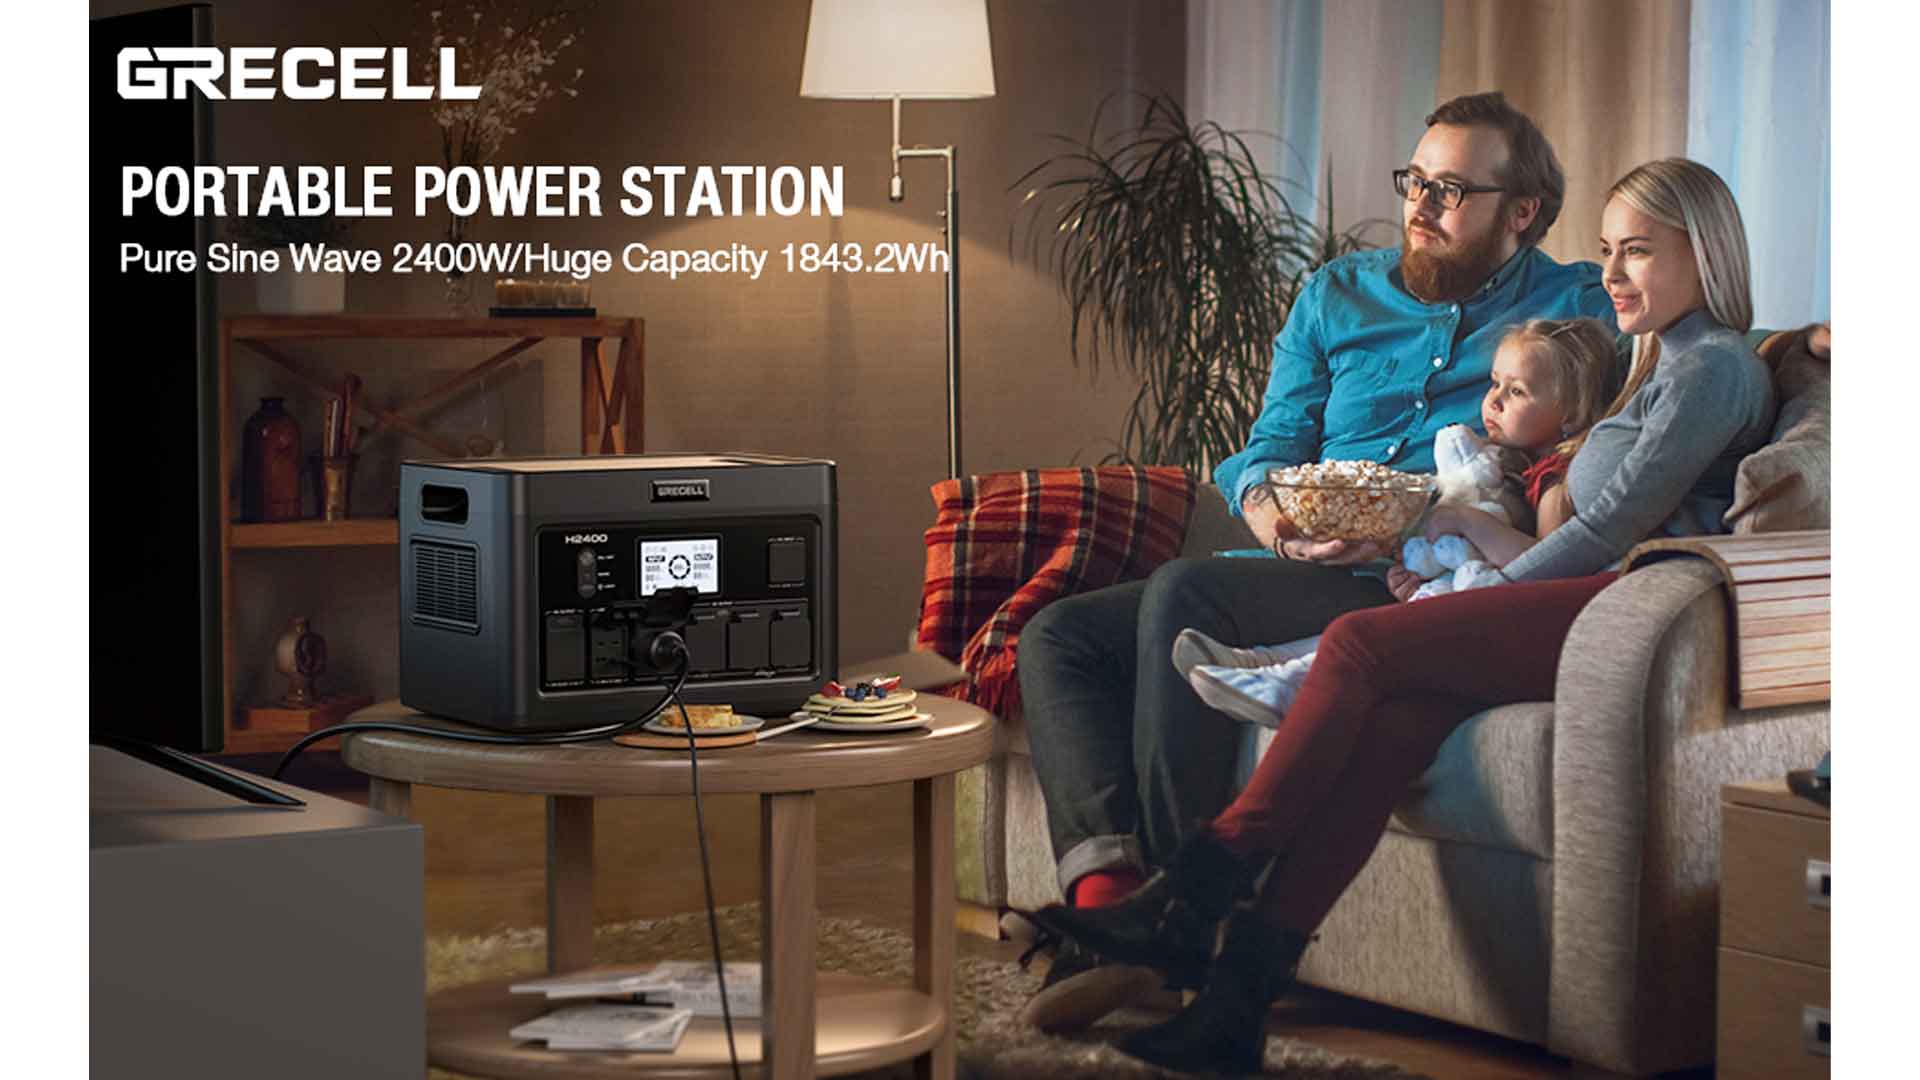 GRECELL H2400 review, GRECELL H2400 features, GRECELL H2400 specs, GRECELL H2400 price, 2400W power station, best power station, portable power station, solar power, solar generator